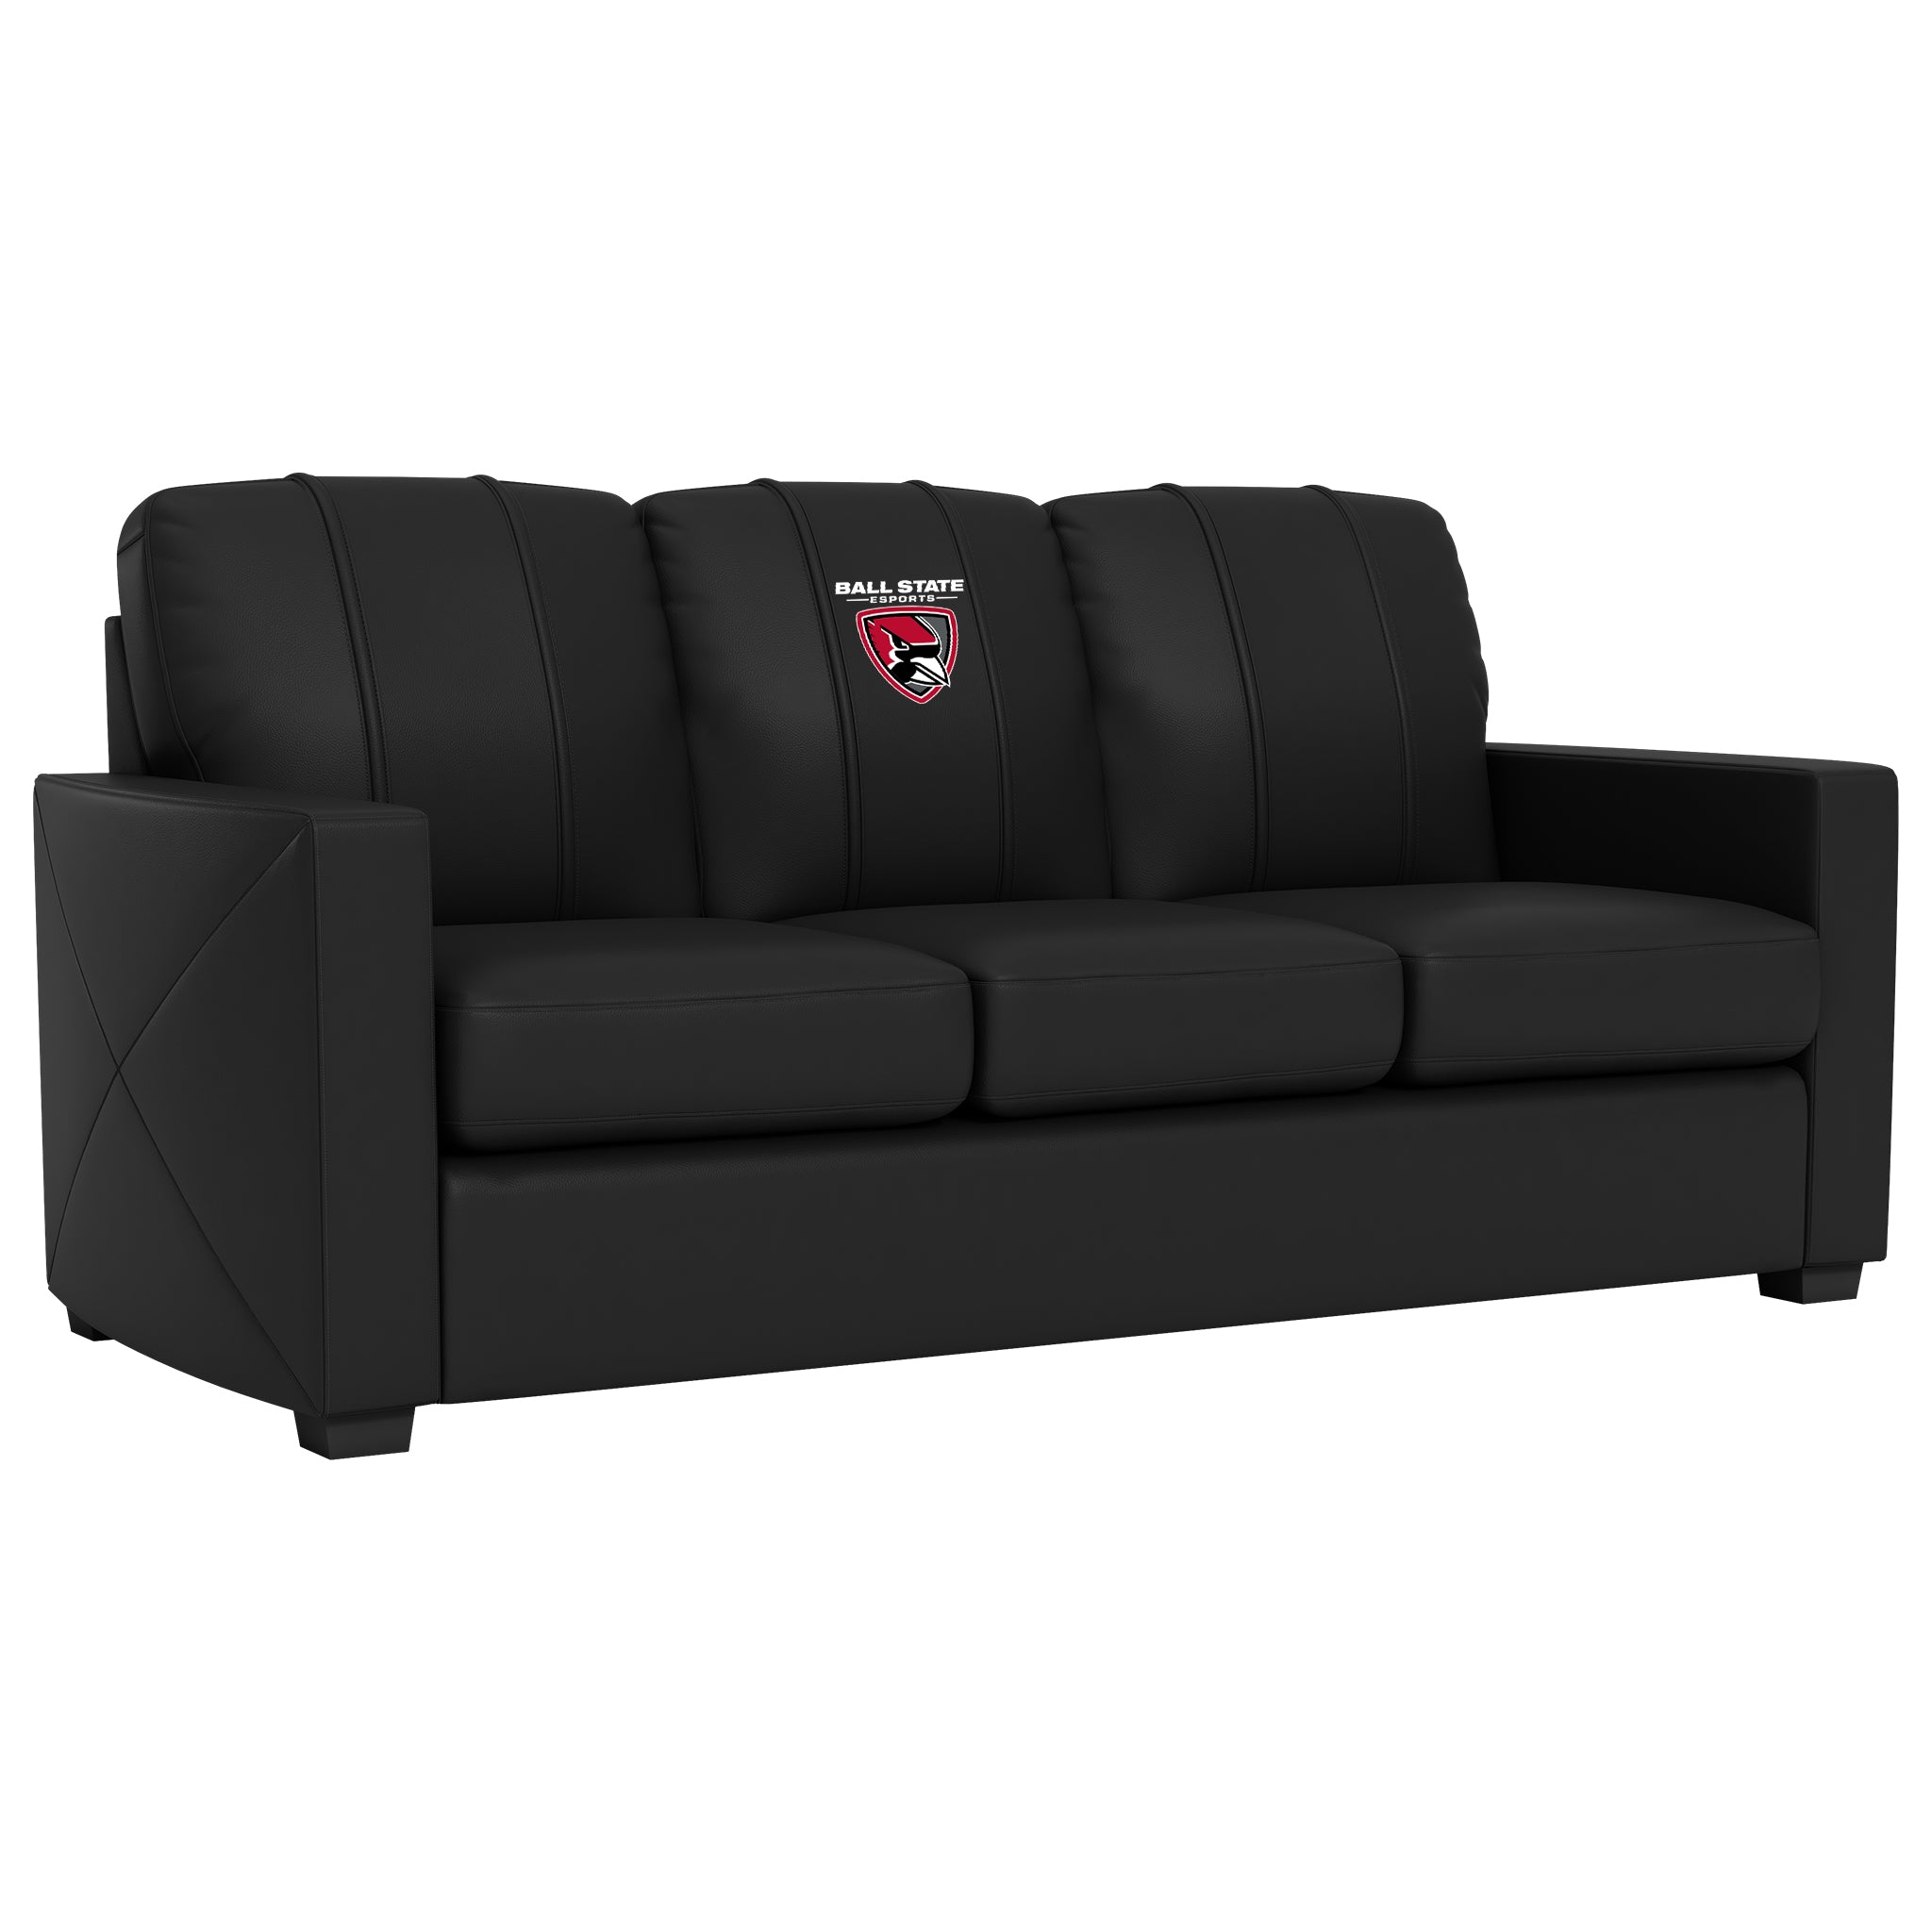 Ball State University Silver Sofa with Ball State Esports